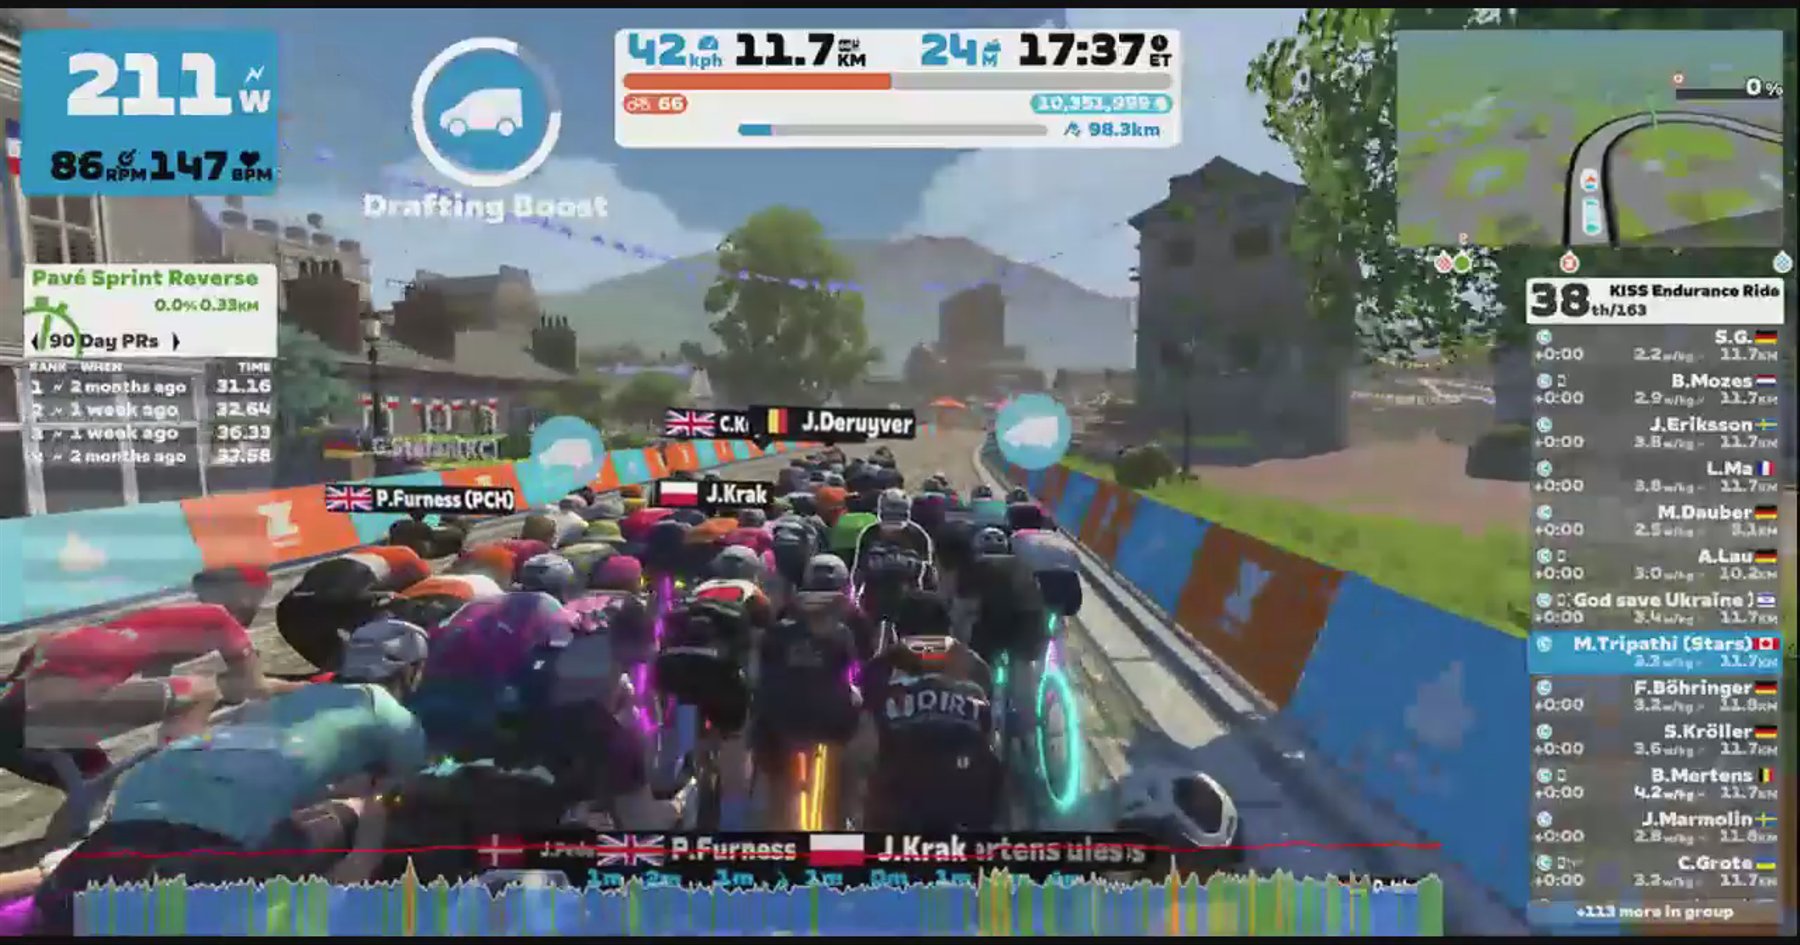 Zwift - Group Ride: KISS Endurance Ride (C) on R.G.V. in France